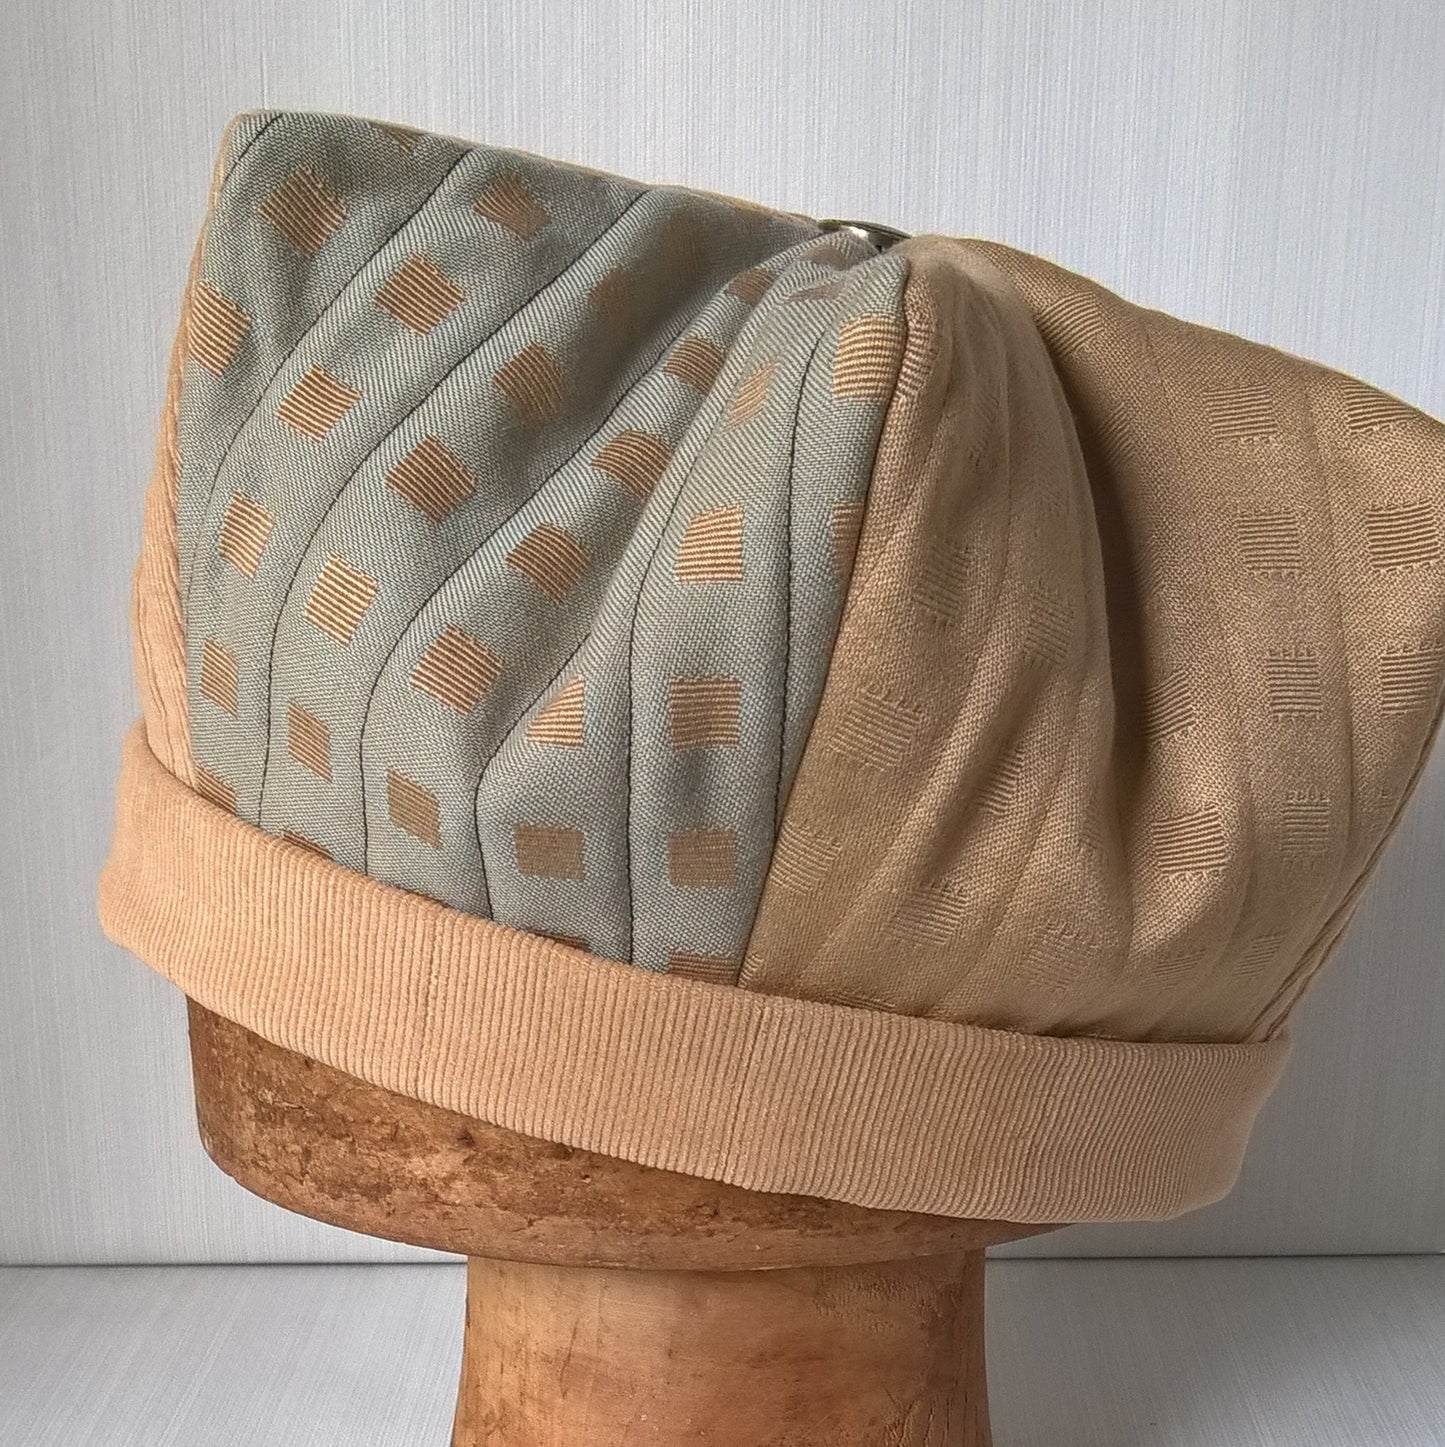 The crown shaped hat features a harlequin style square pattern